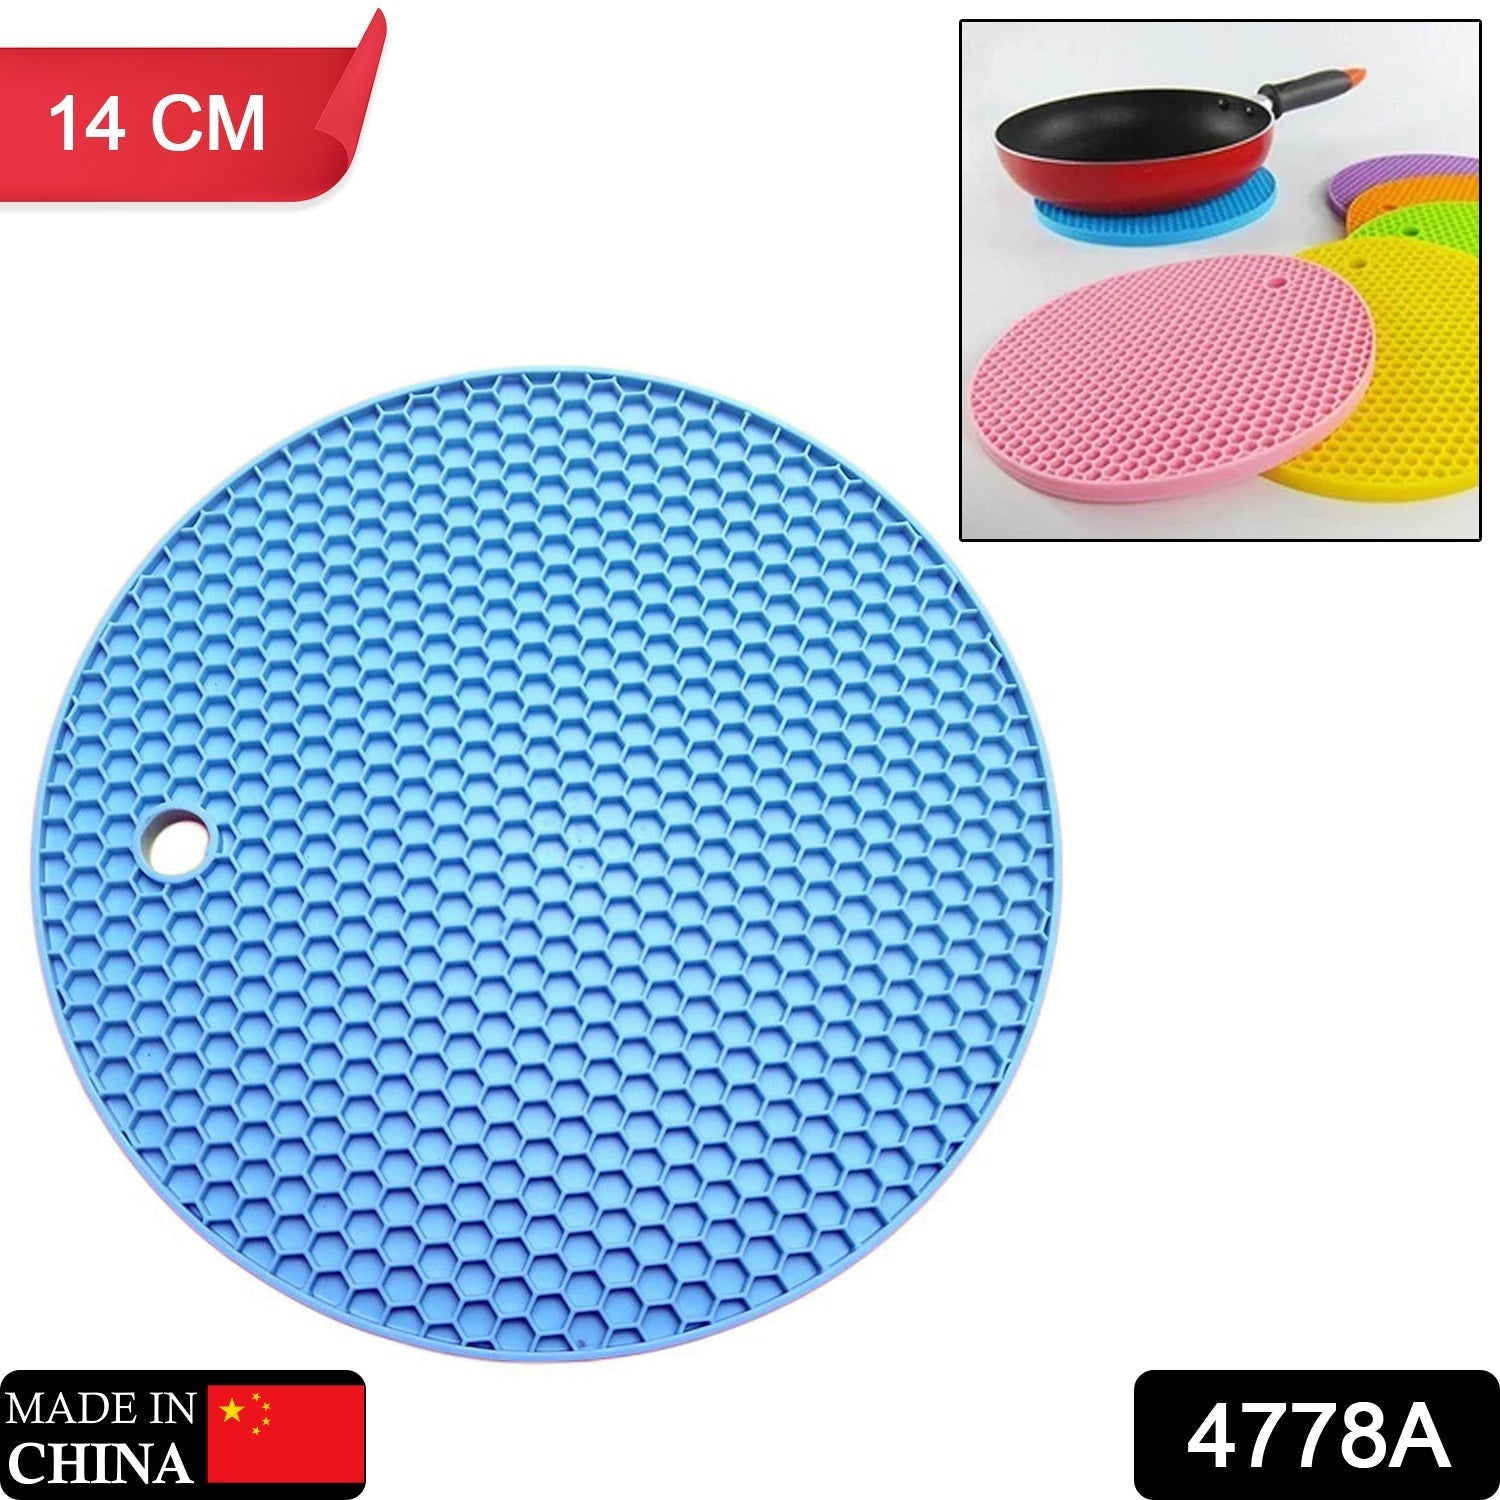 4778A Silicone Trivet for Hot Dish and Pot, Silicone Hot Pads ( 1 pcs ) DeoDap